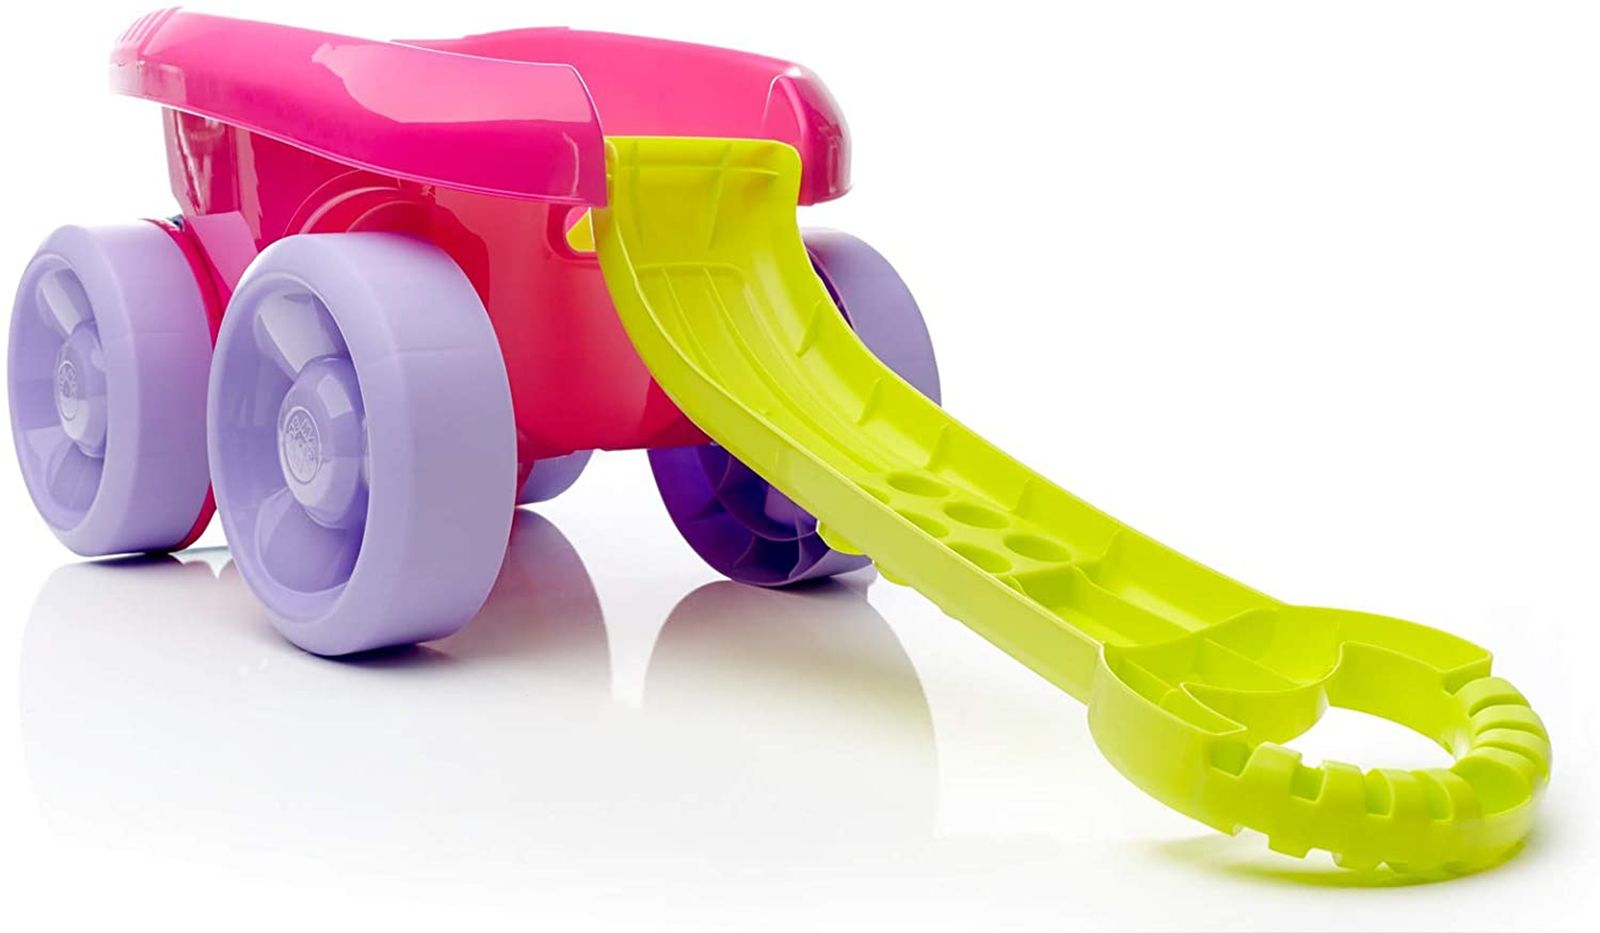 Girl toys, boy toys, and parenting: The science of toy preferences